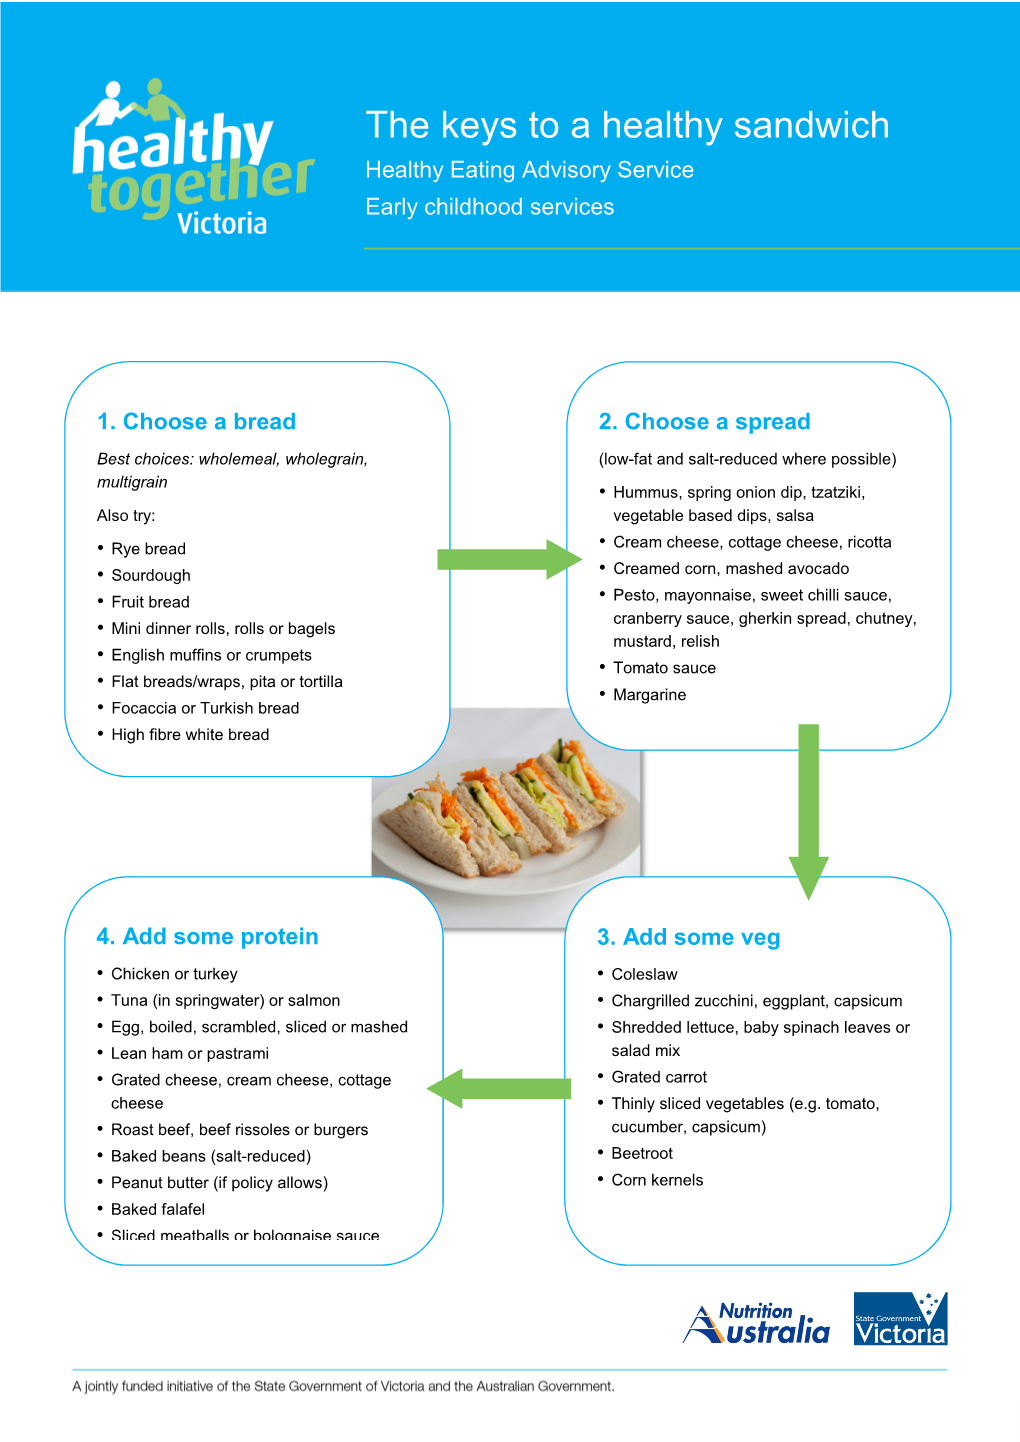 The Keys to a Healthy Sandwich Healthy Eating Advisory Service Early Childhood Services